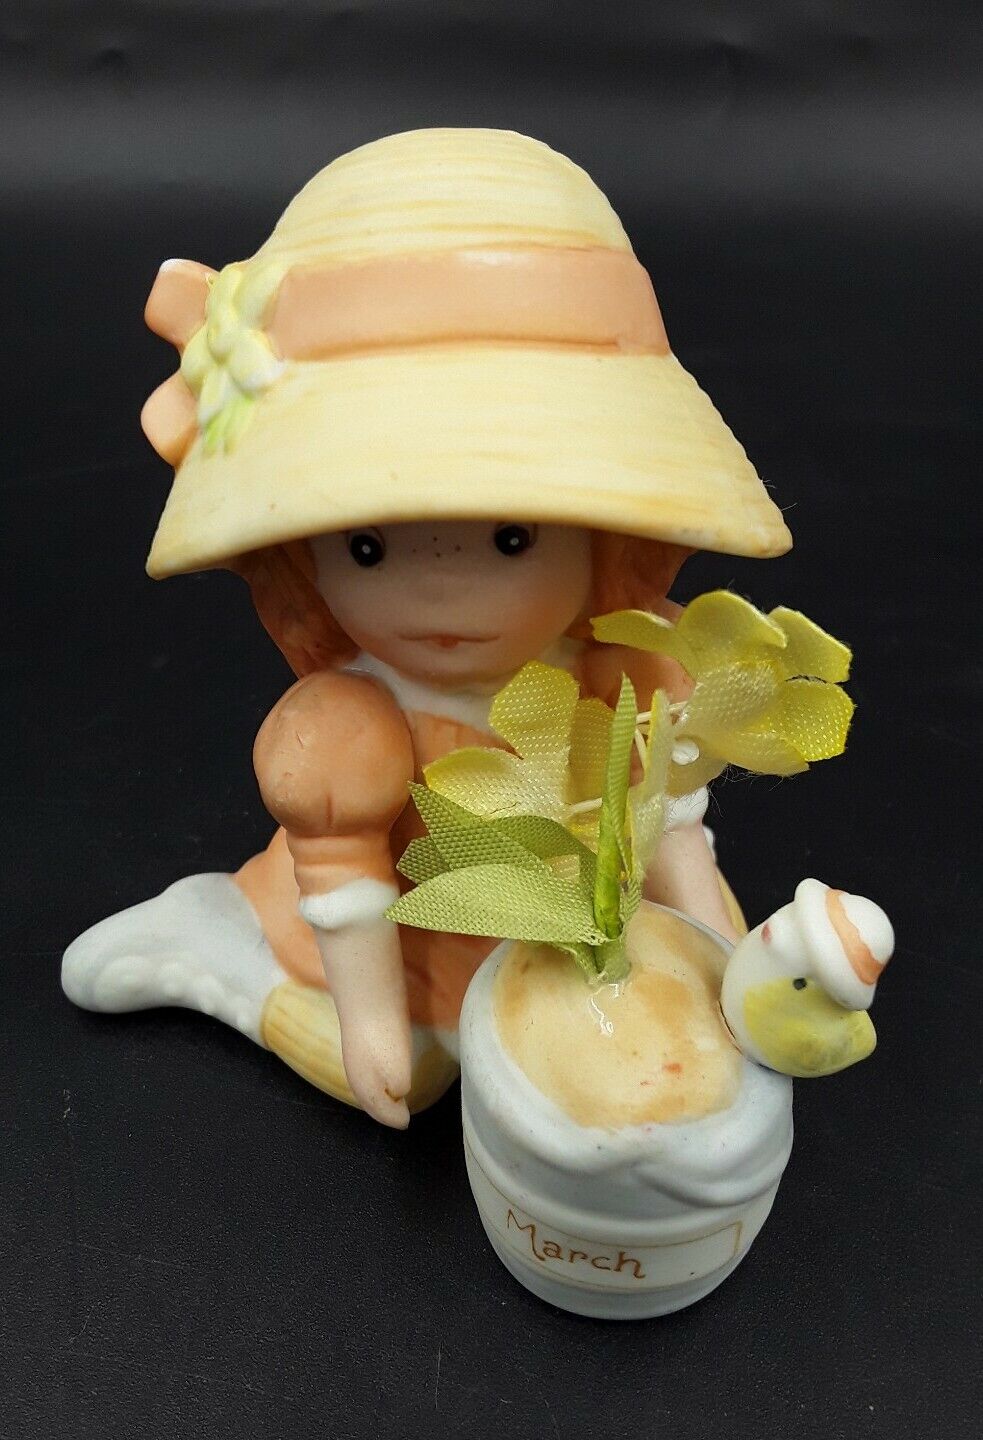 VINTAGE 1984 APPLAUSE WALLACE BERRIE Figurine March GIRL